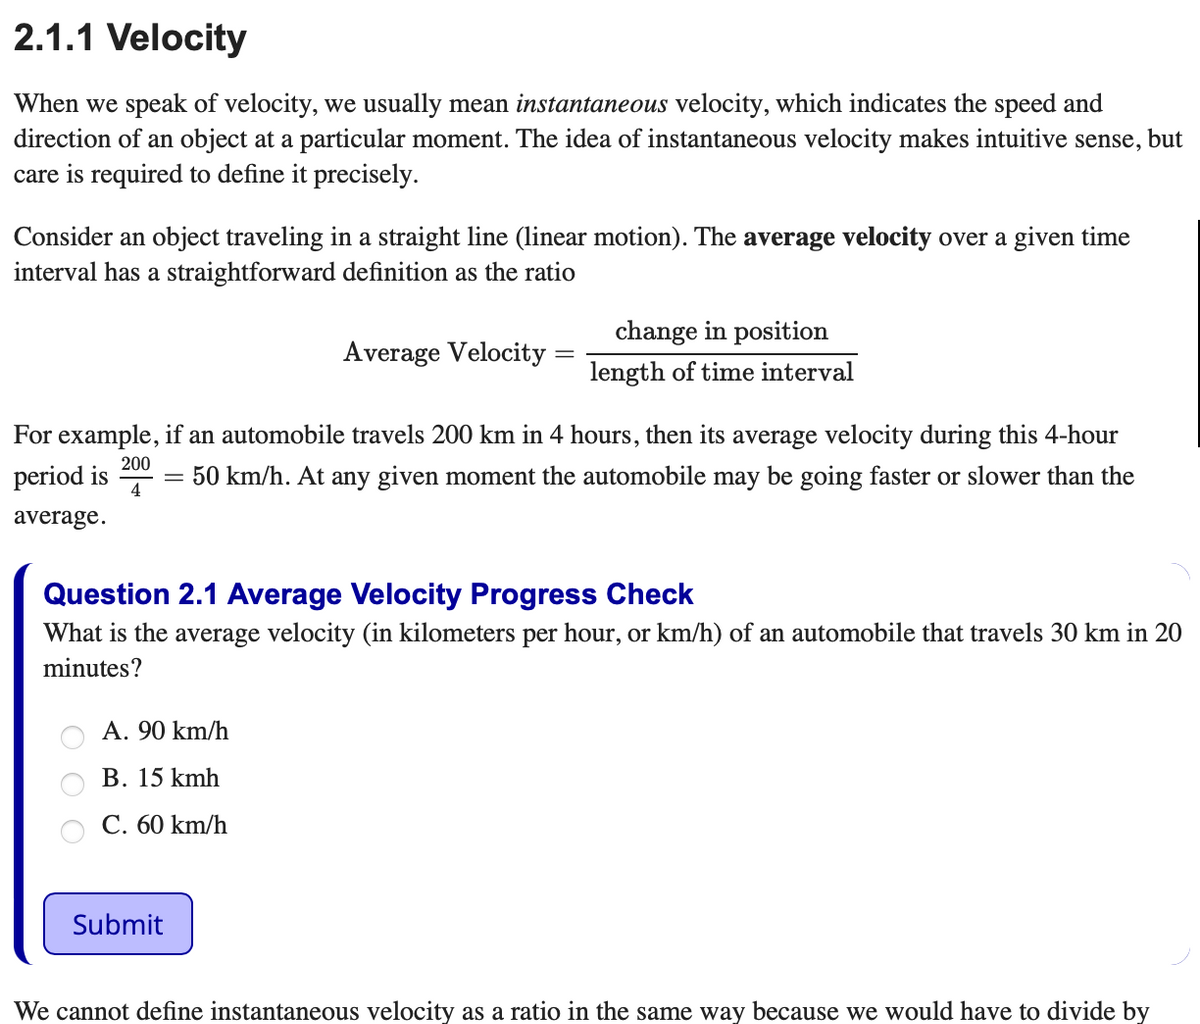 2.1.1 Velocity
When we speak of velocity, we usually mean instantaneous velocity, which indicates the speed and
direction of an object at a particular moment. The idea of instantaneous velocity makes intuitive sense, but
care is required to define it precisely.
Consider an object traveling in a straight line (linear motion). The average velocity over a given time
interval has a straightforward definition as the ratio
change in position
Average Velocity
length of time interval
For example, if an automobile travels 200 km in 4 hours, then its average velocity during this 4-hour
period is
4
200
= 50 km/h. At any given moment the automobile may be going faster or slower than the
average.
Question 2.1 Average Velocity Progress Check
What is the average velocity (in kilometers per hour, or km/h) of an automobile that travels 30 km in 20
minutes?
A. 90 km/h
В. 15 kmh
С. 60 km/h
Submit
We cannot define instantaneous velocity as a ratio in the same way because we would have to divide by
